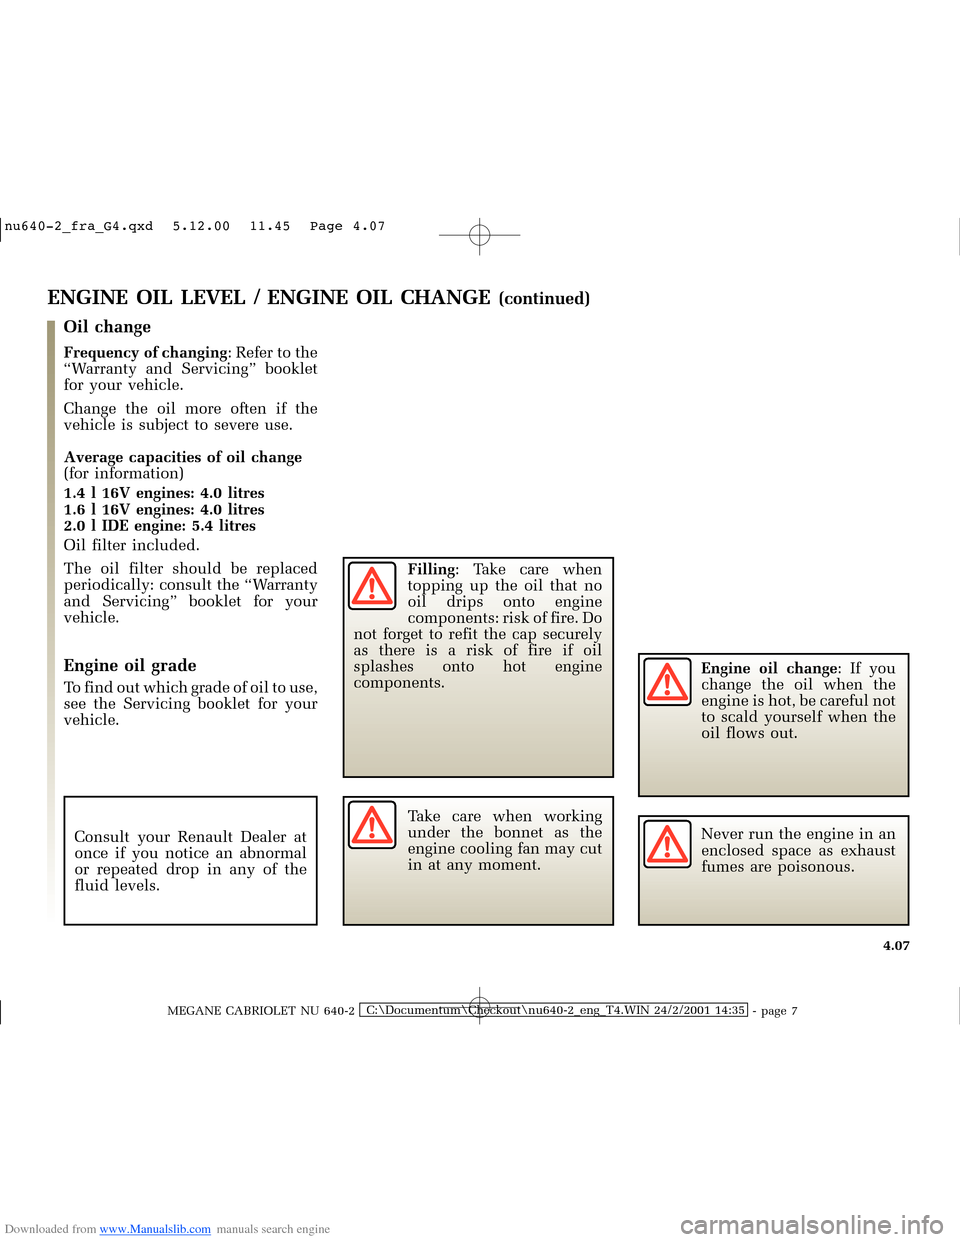 RENAULT MEGANE 2000 X64 / 1.G Owners Manual Downloaded from www.Manualslib.com manuals search engine �Q�X������B�I�U�D�B�*���T�[�G� � �������� � ������ � �3�D�J�H� ����
MEGANE CABRIOLET NU 640-2C:\Documentum\Checko